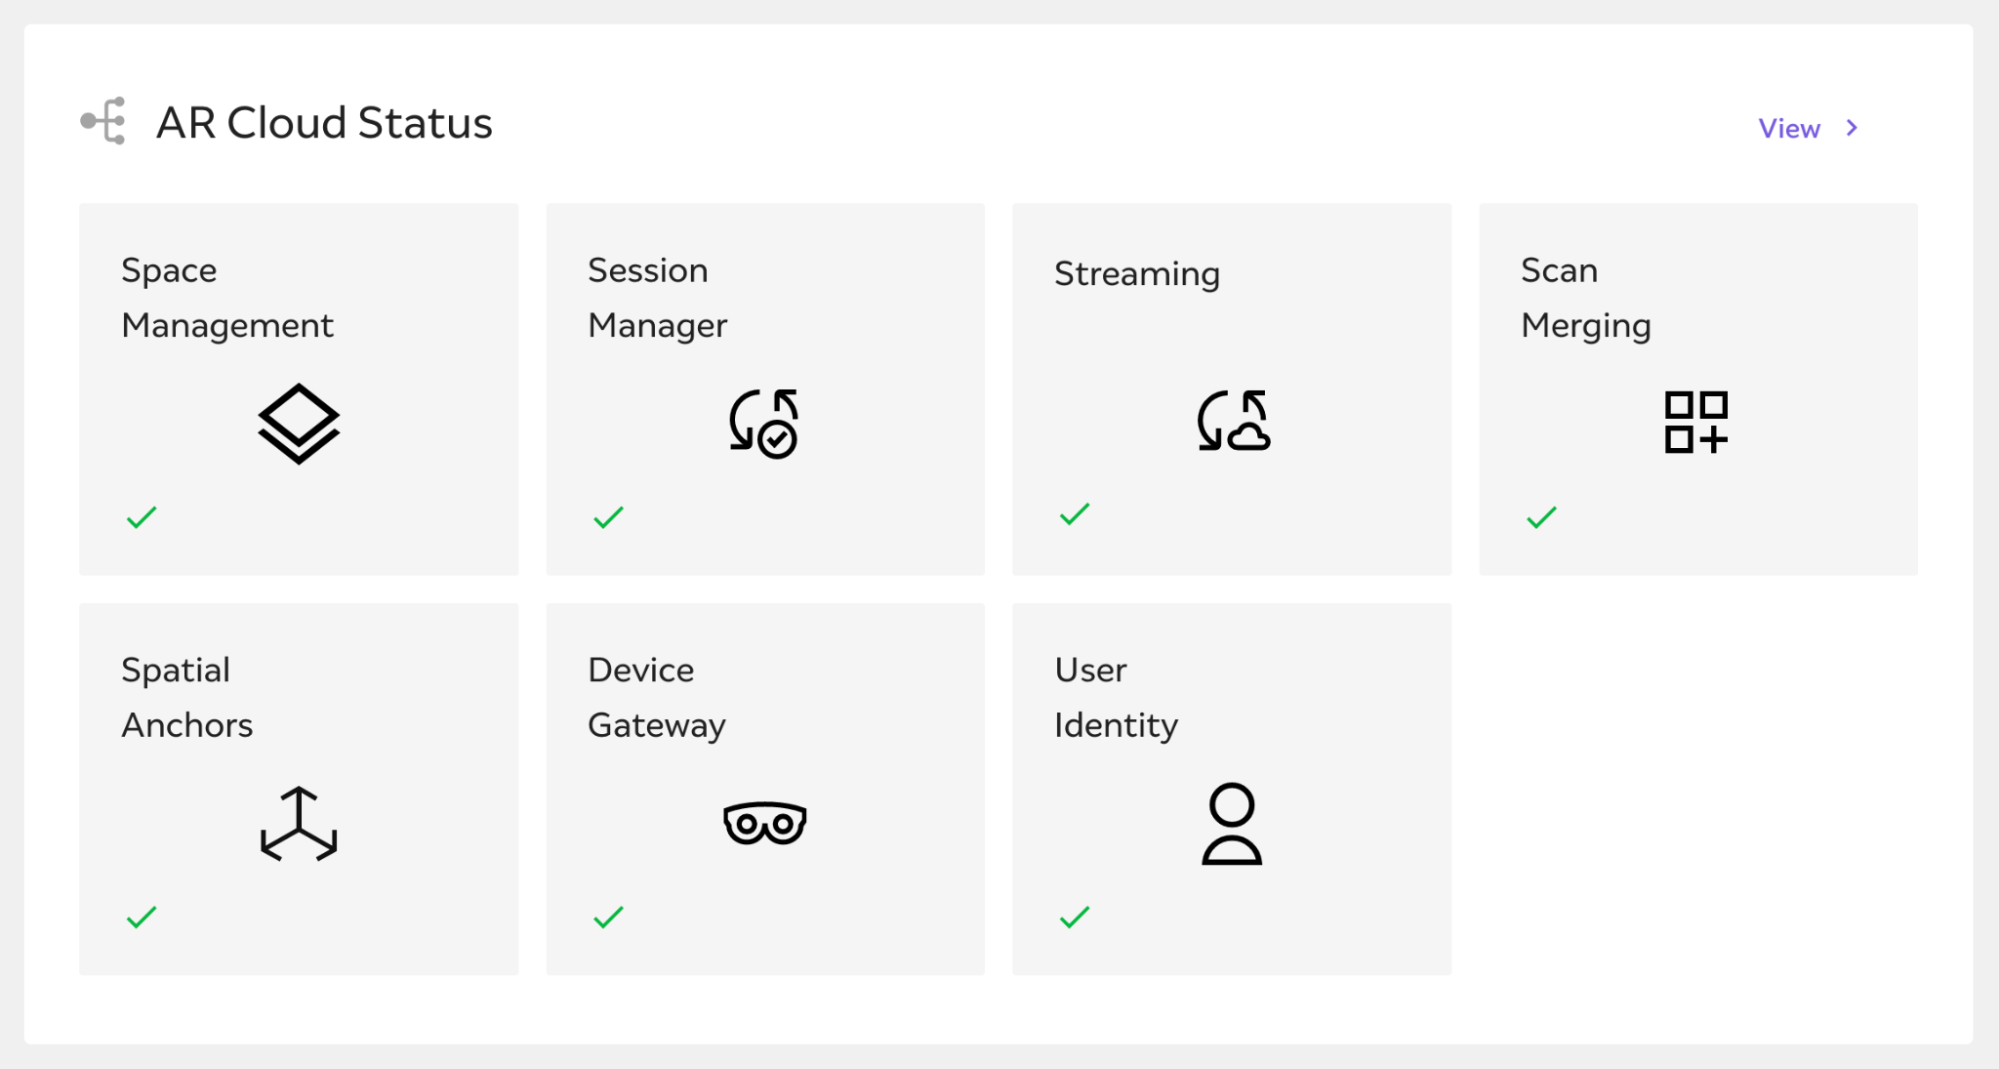 The AR Cloud status section of the dashboard